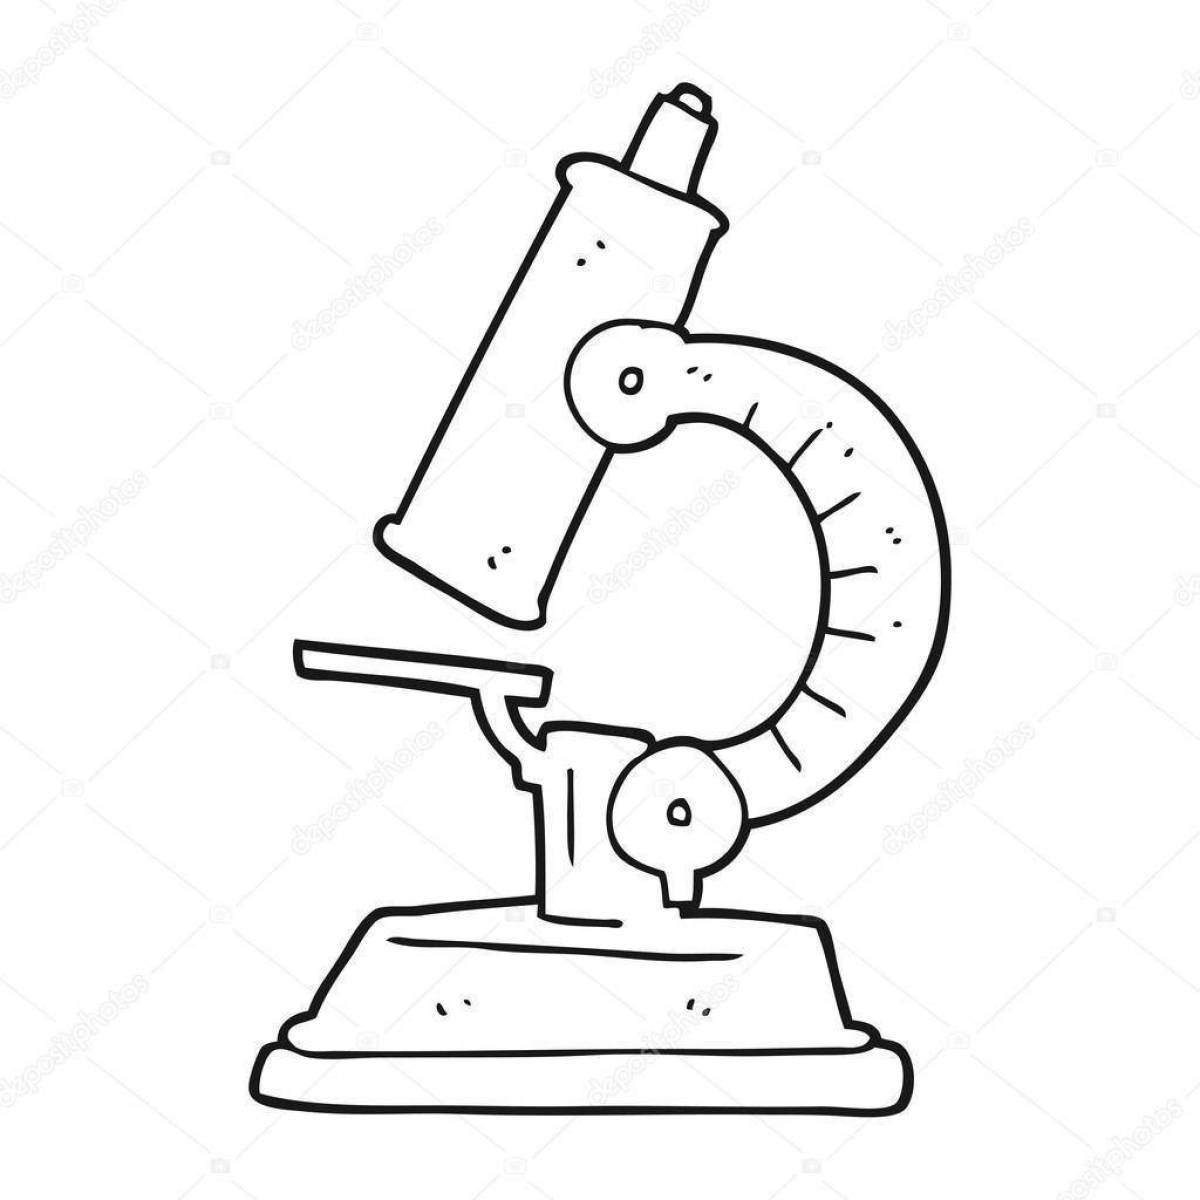 A funny coloring book microscope for kids